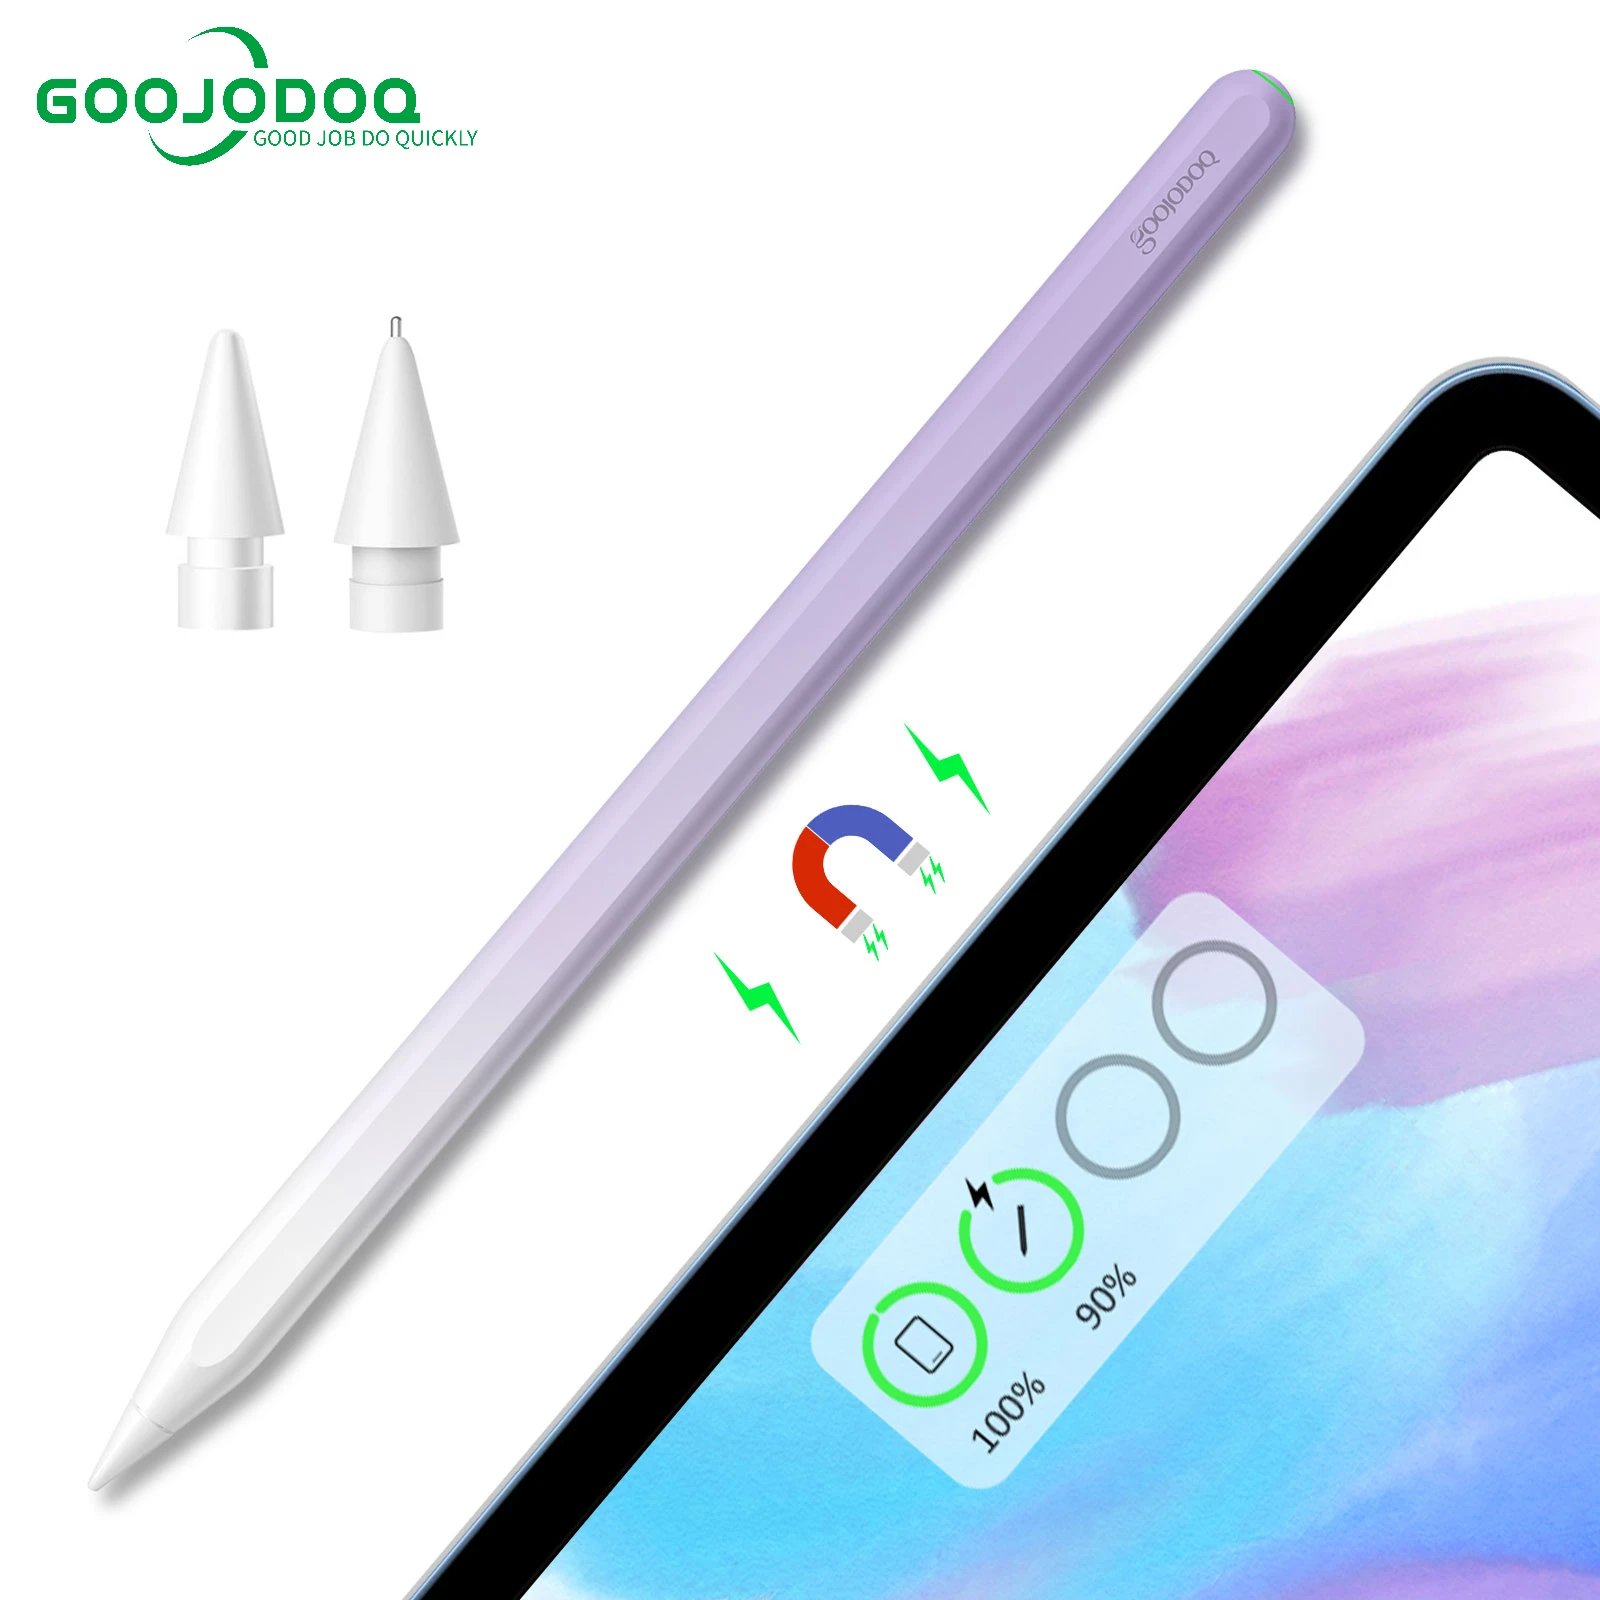 GOOJODOQ Pencil Stylus Pen for iPad Pro 2020 10.2 (7th Gen) 2019 /2018 / Air 3 with Palm Rejection for Apple Pencil 2 애플펜슬